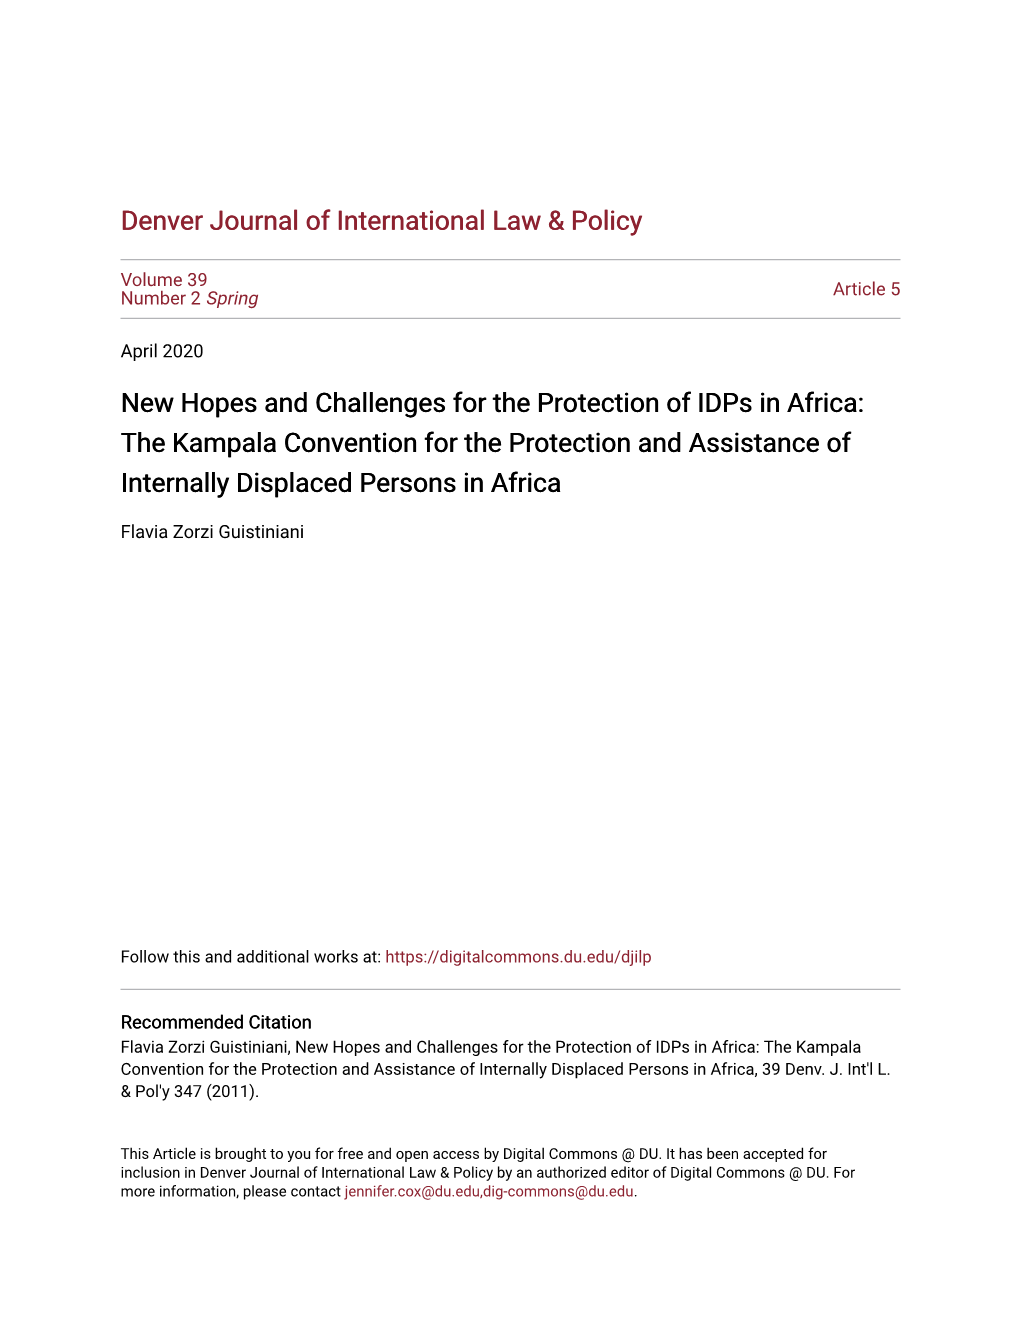 New Hopes and Challenges for the Protection of Idps in Africa: the Kampala Convention for the Protection and Assistance of Internally Displaced Persons in Africa